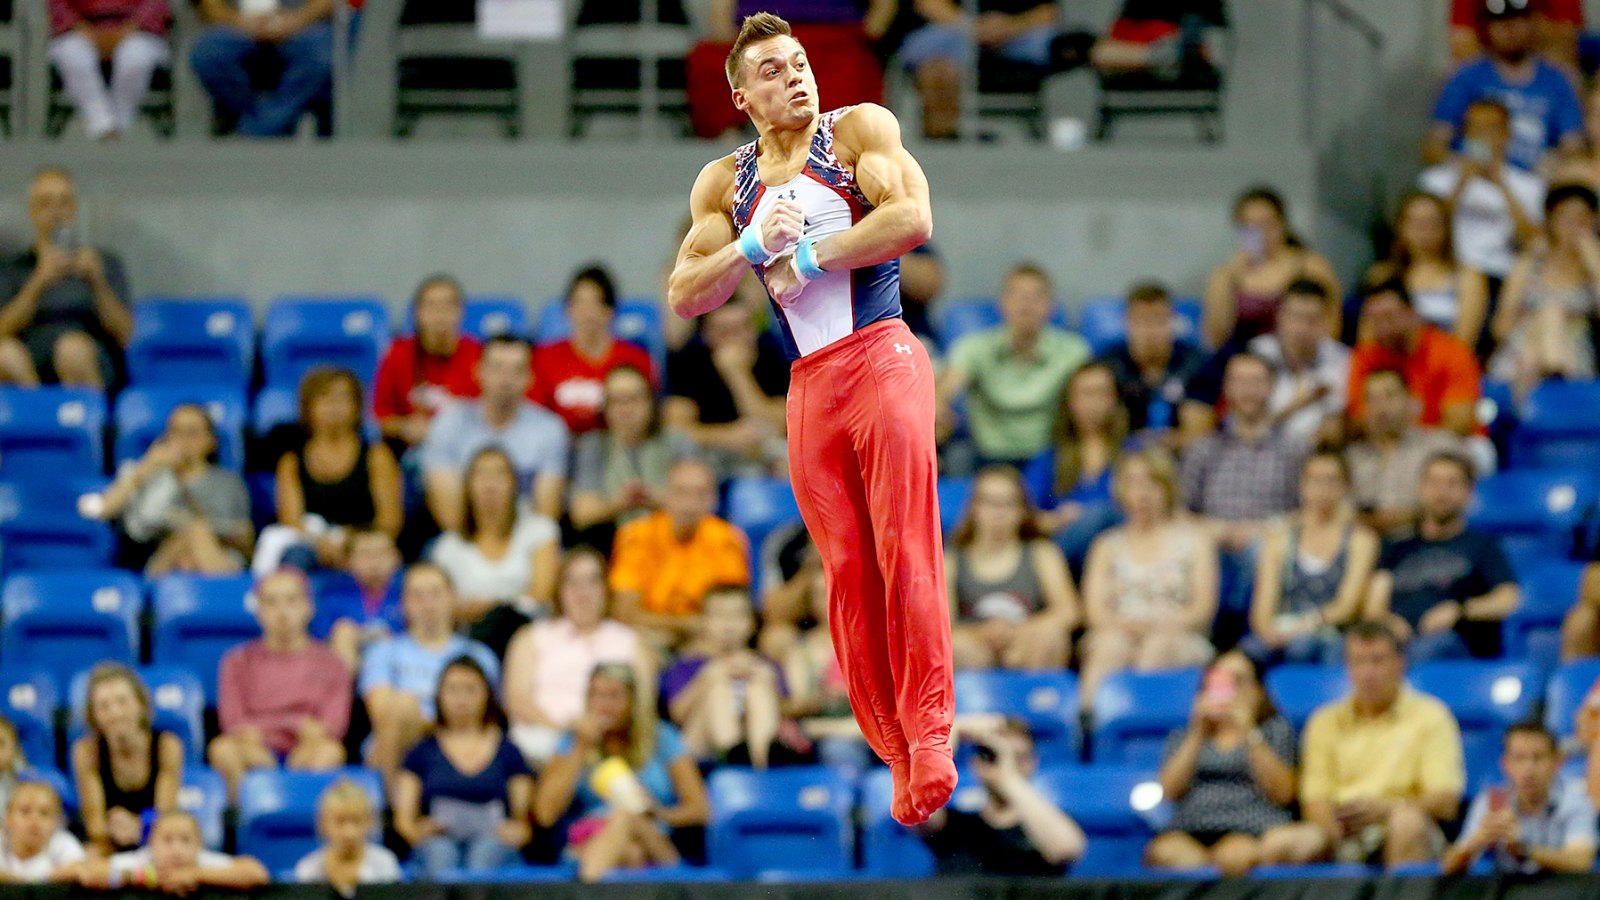 Sam Mikulak competes on the high bar during day two of the 2016 Men's Gymnastics Olympic Trials at Chafitz Arena on June 25, 2016 in St. Louis, Missouri.